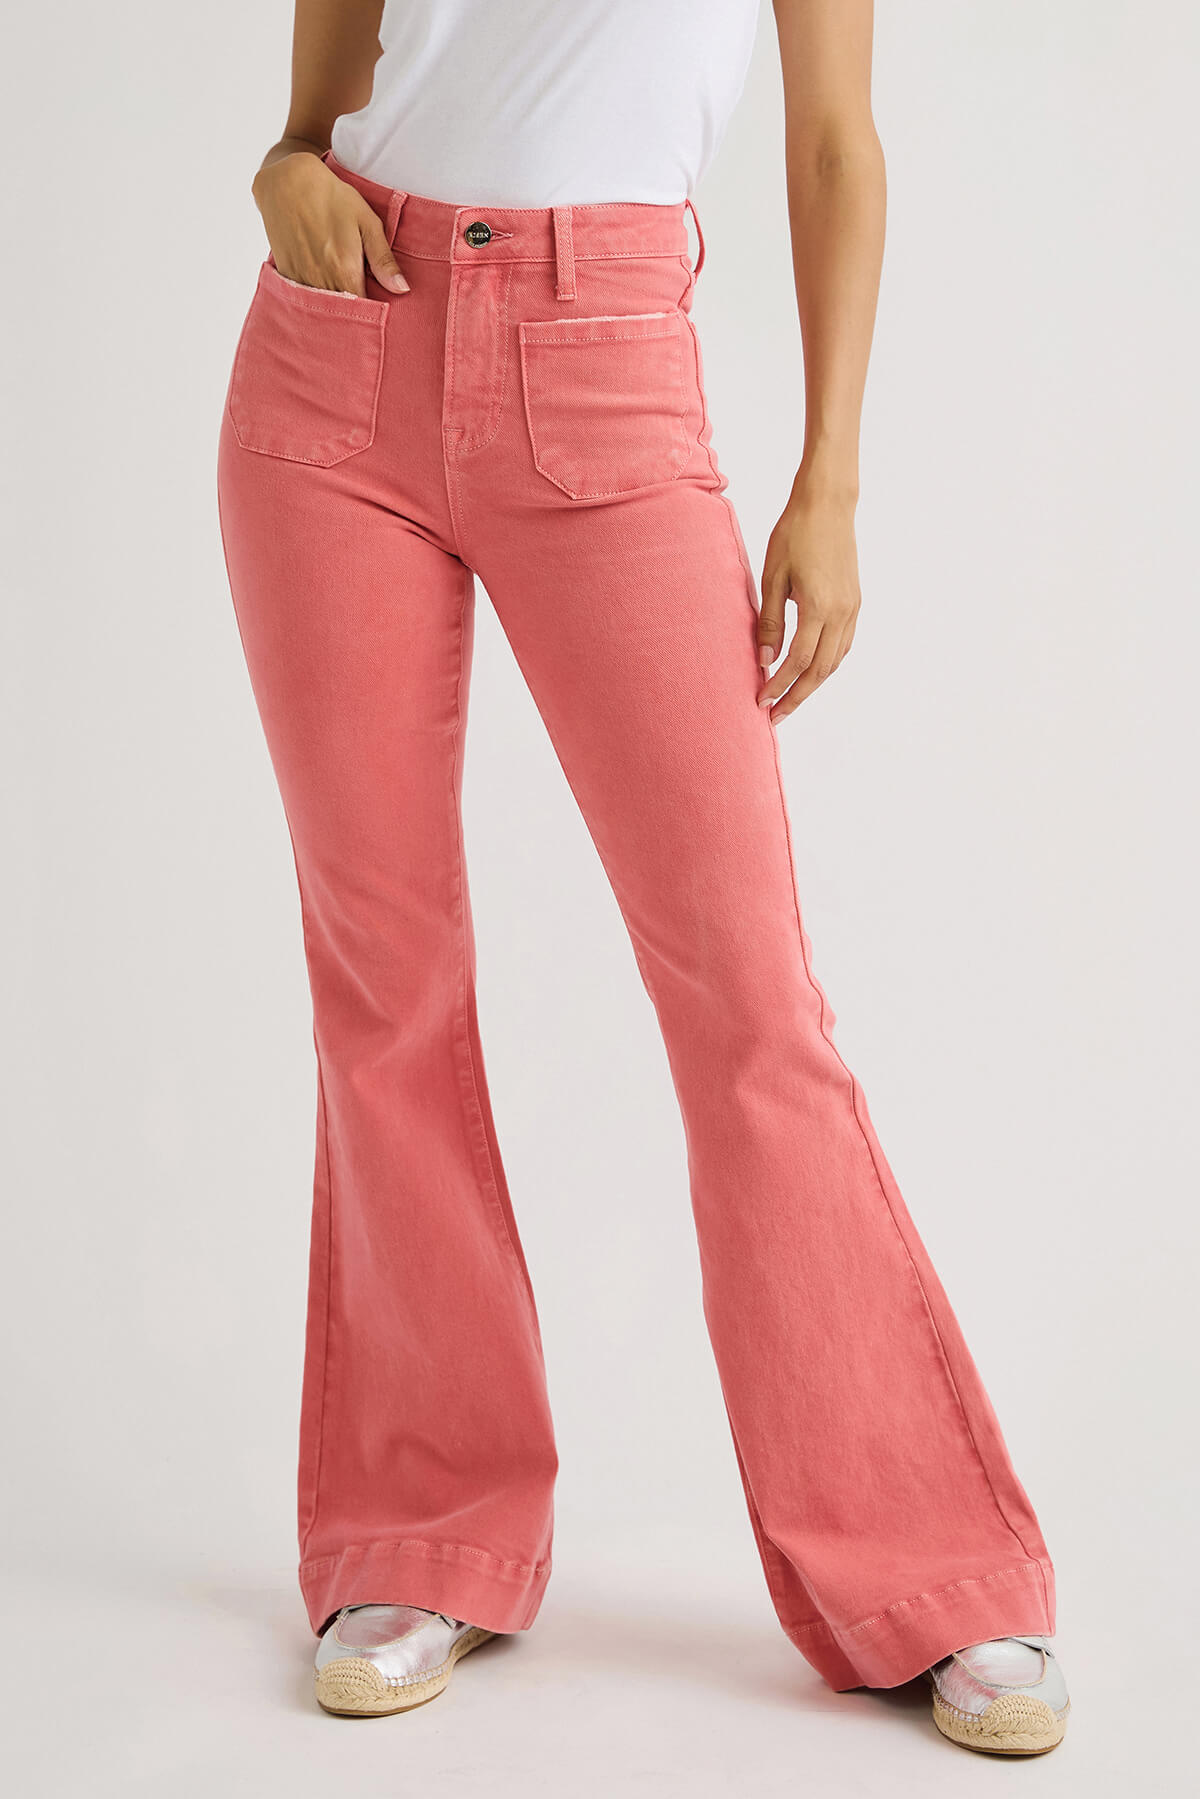 Womens Pocket Jeans Sweet Peach Fashion Rope-Belted Backpackers